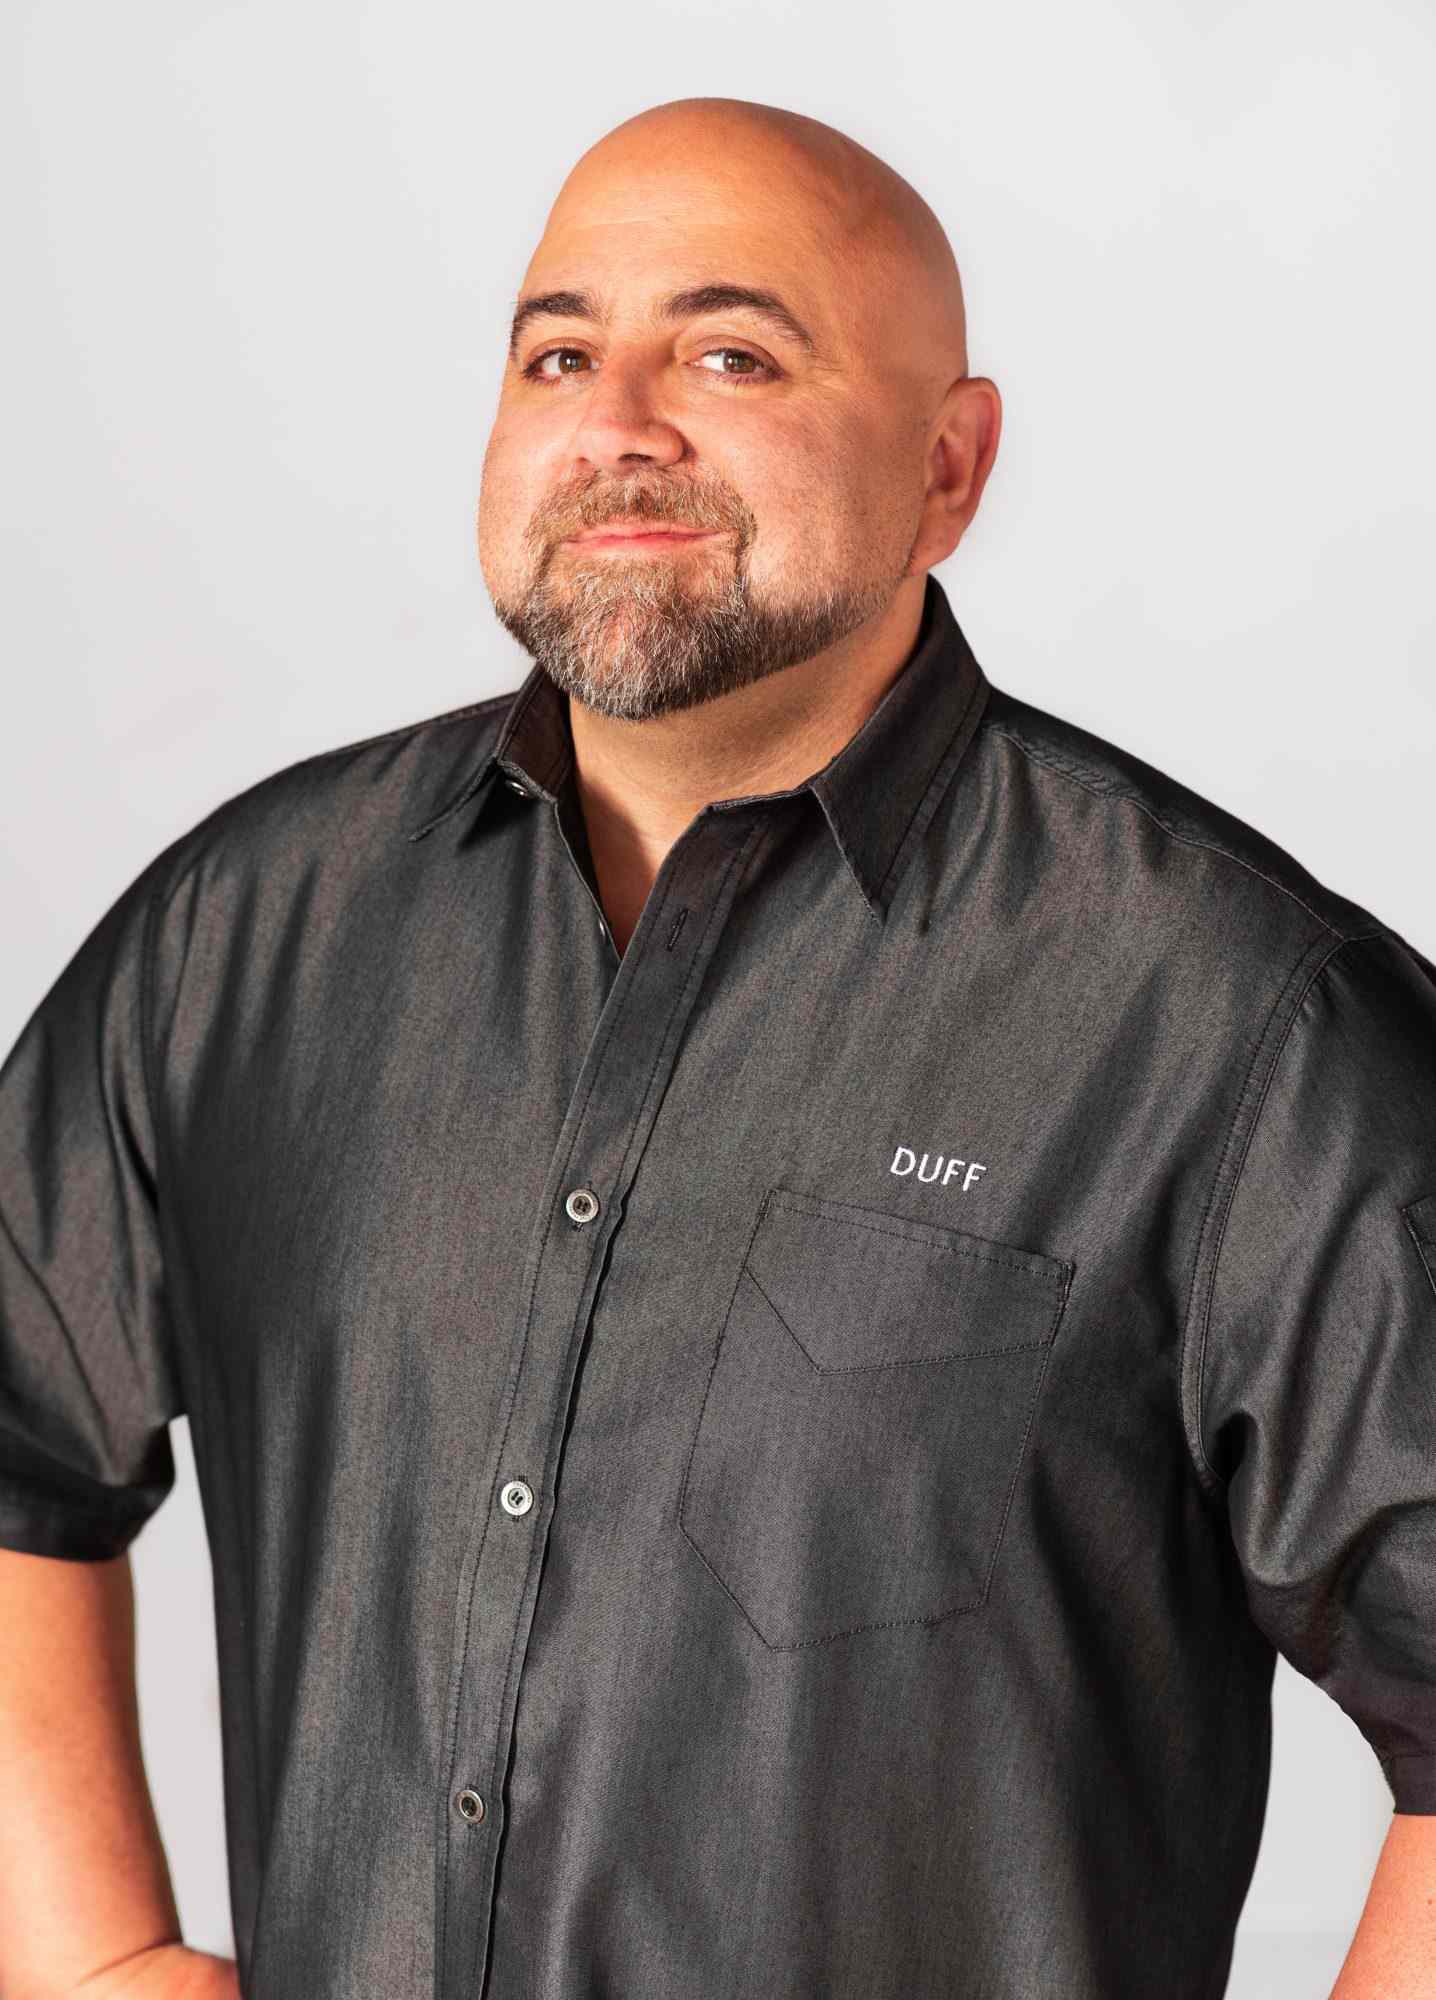 Homemade Podcast Episode 11: Duff Goldman on Crispy Cookies, Cake Baking Basics, and Cooking with Kids